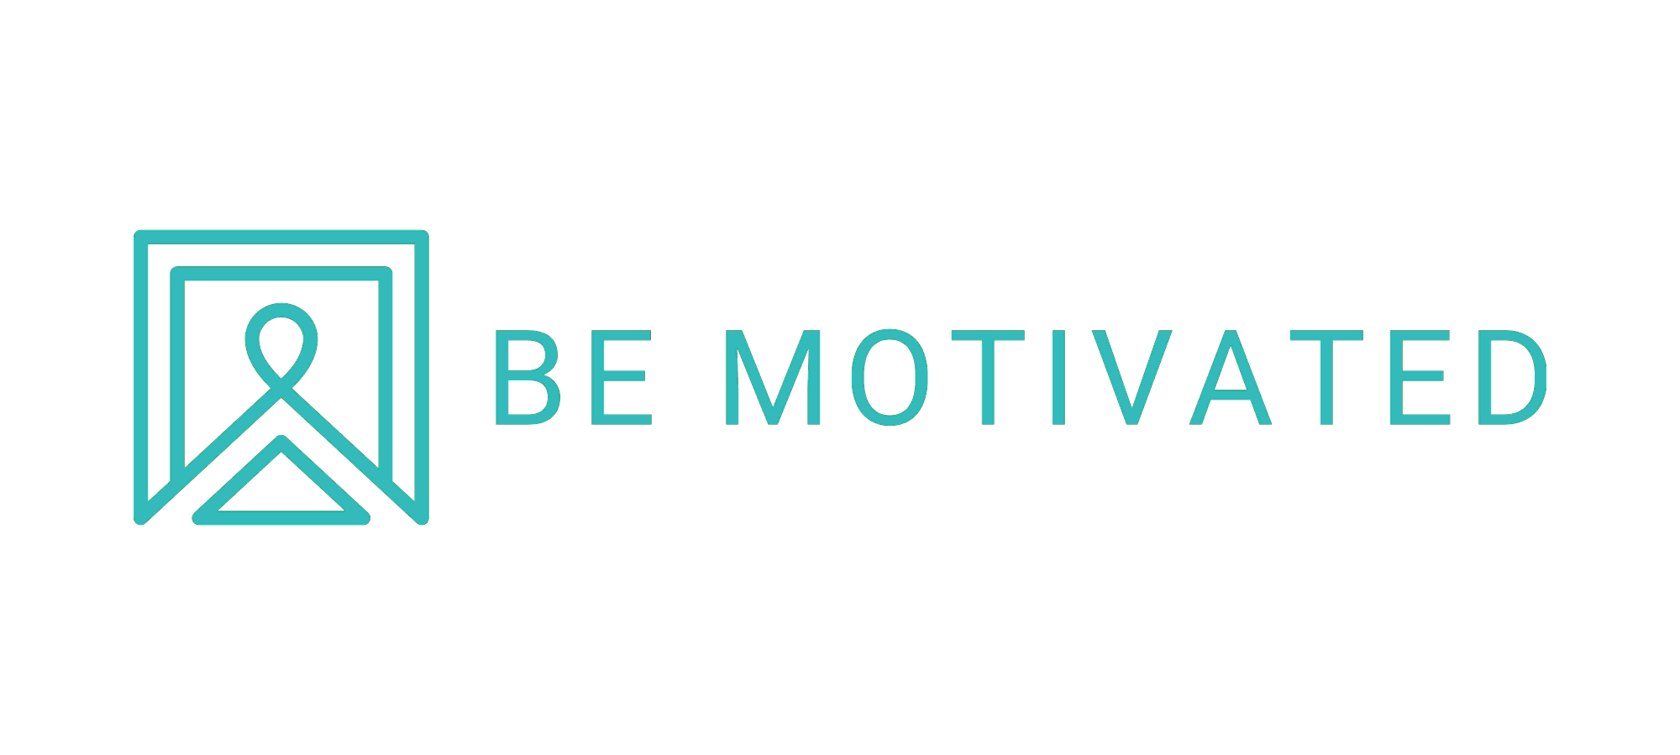 BE MOTIVATED